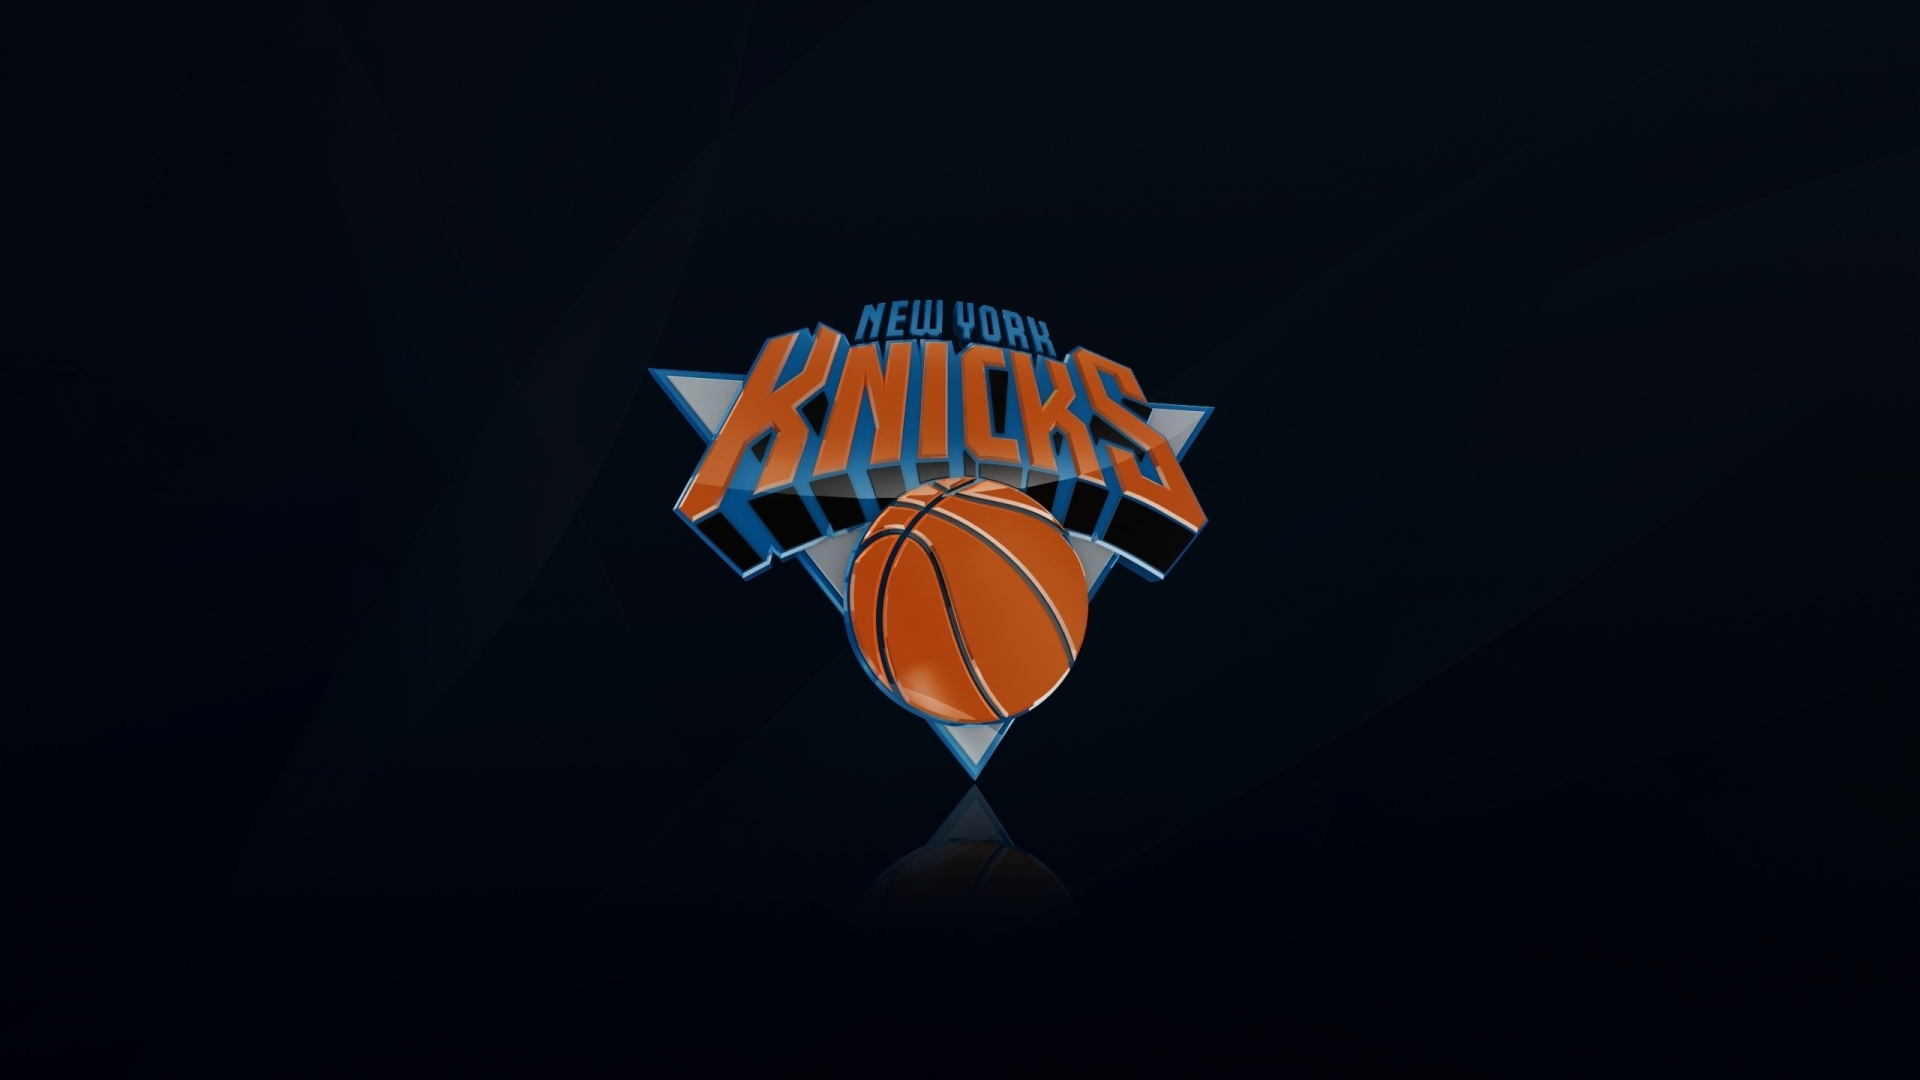 The New York Knickerbockers for 1920 x 1080 HDTV 1080p resolution